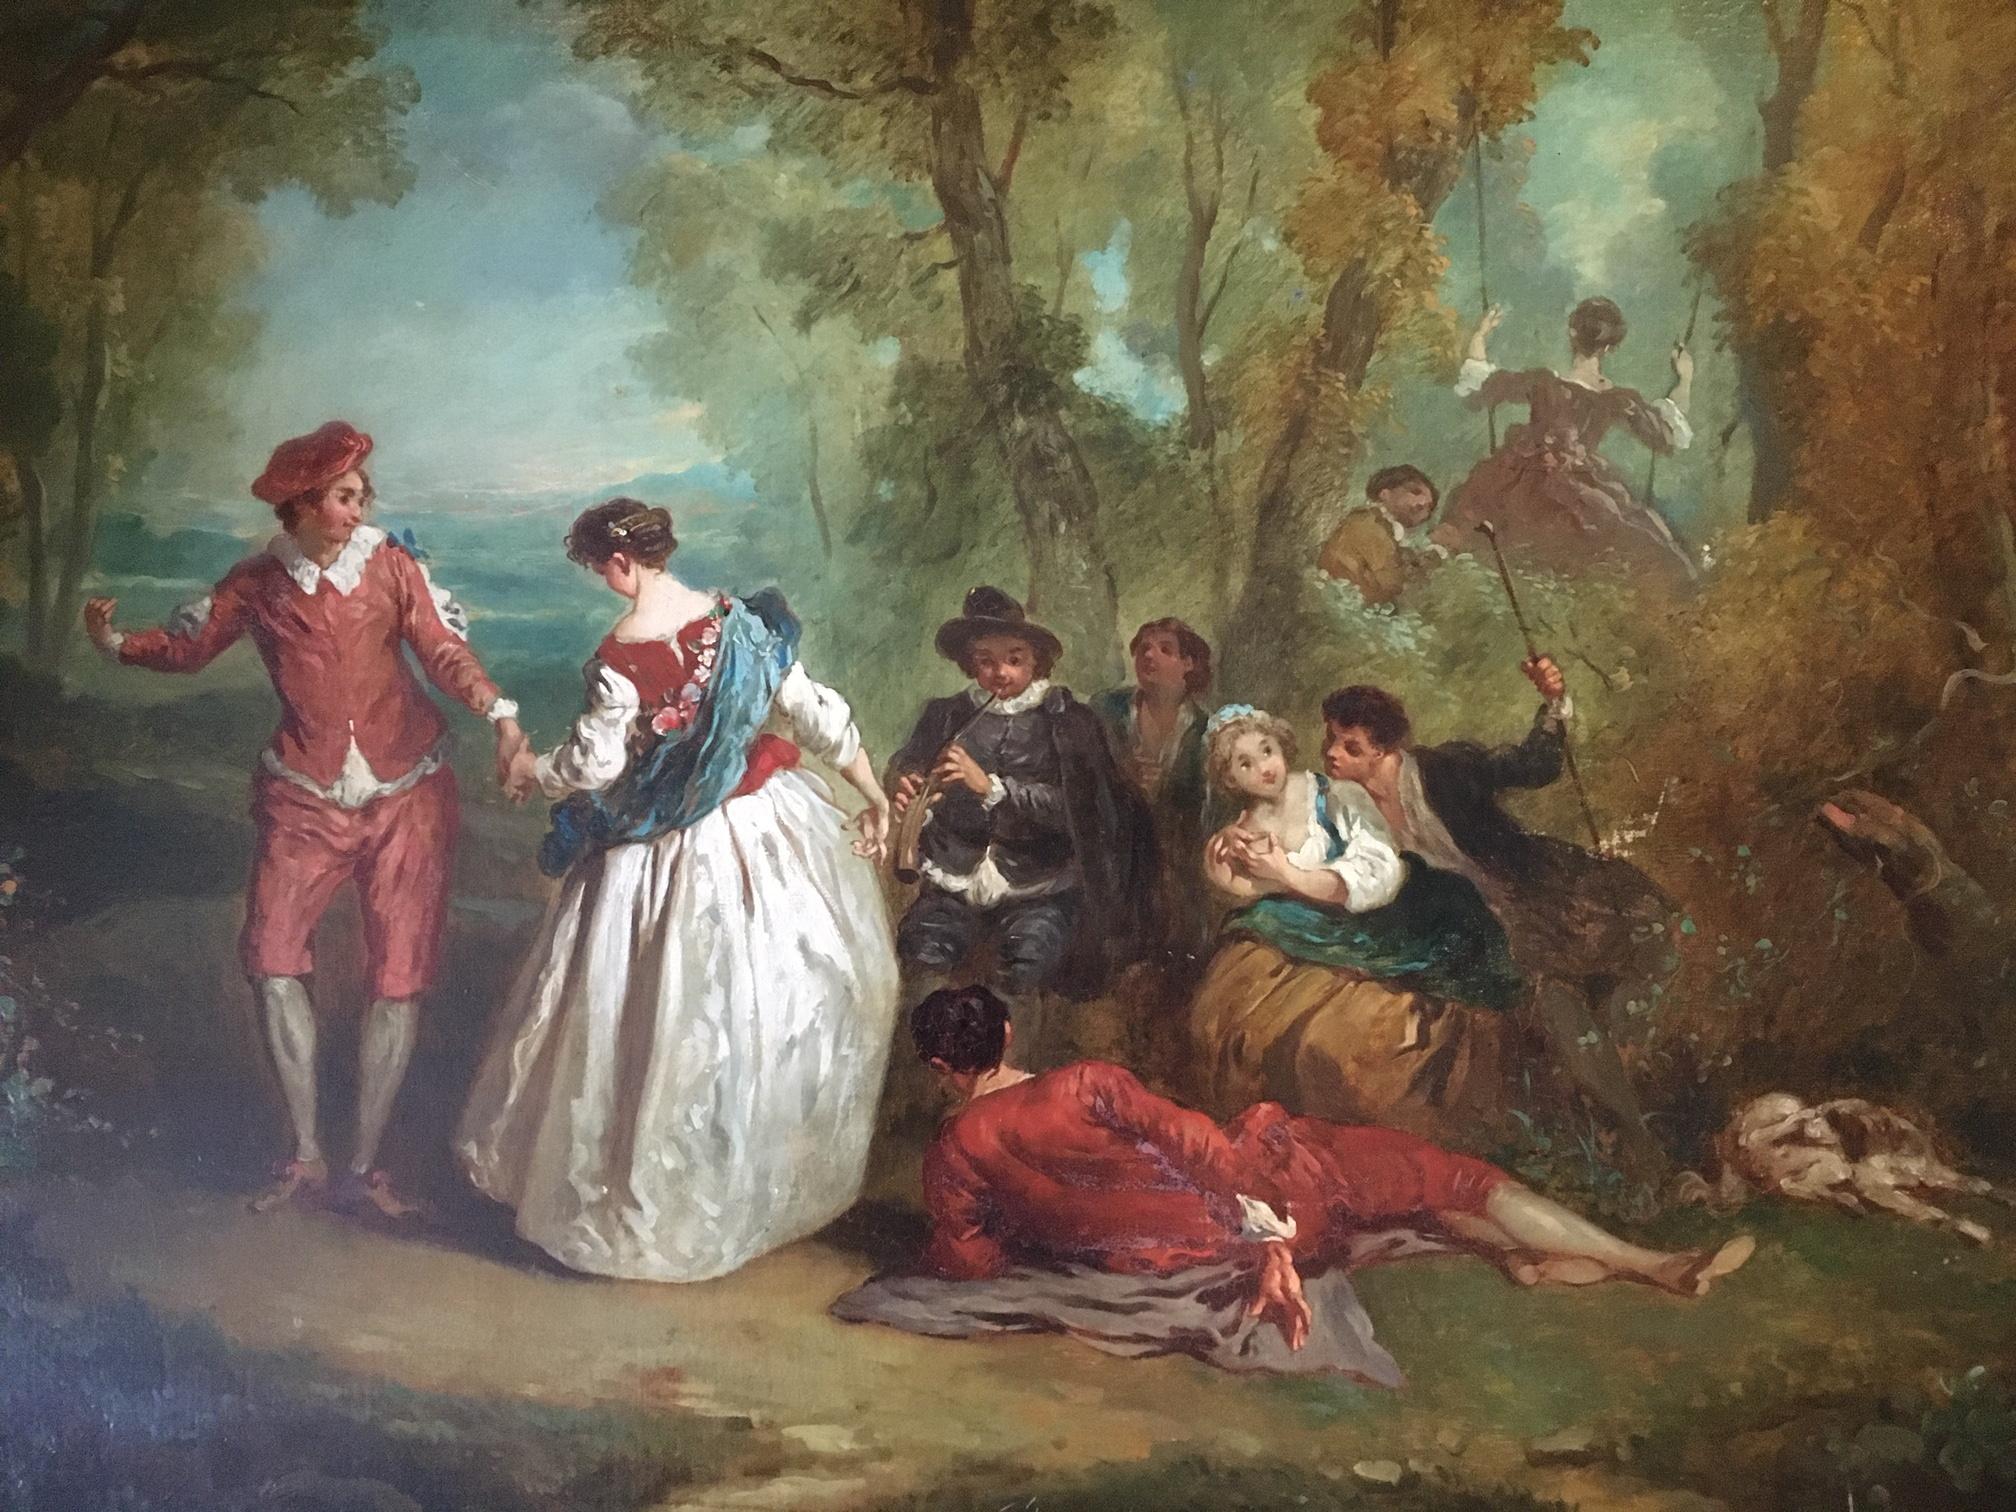 Jean Antoine Watteau (1684-1721) circle of. 18th century old master painting, France. 

With great pride we offer an extremely rare masterpiece from the 18th century, France. This painting is unsigned as most of his works. It has no provenance,